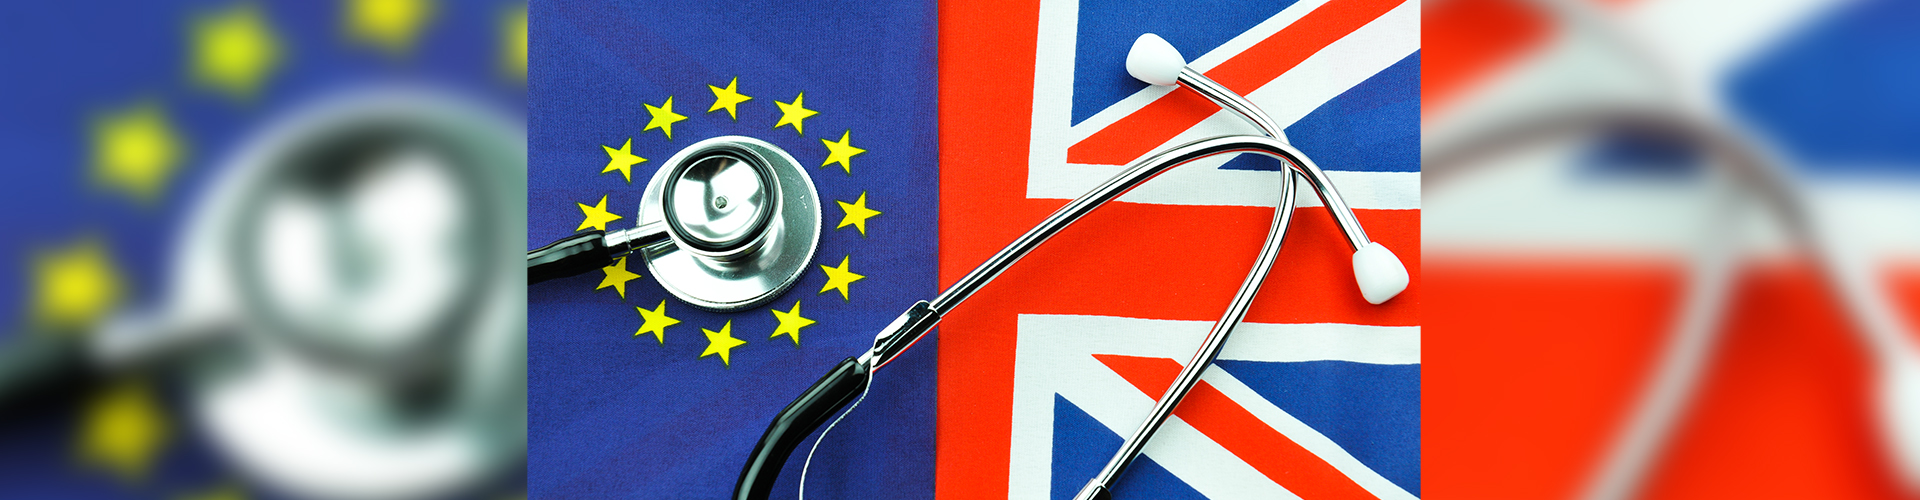 Healthcare Bodies Call for Healthcare to be ‘at the heart’ of Brexit